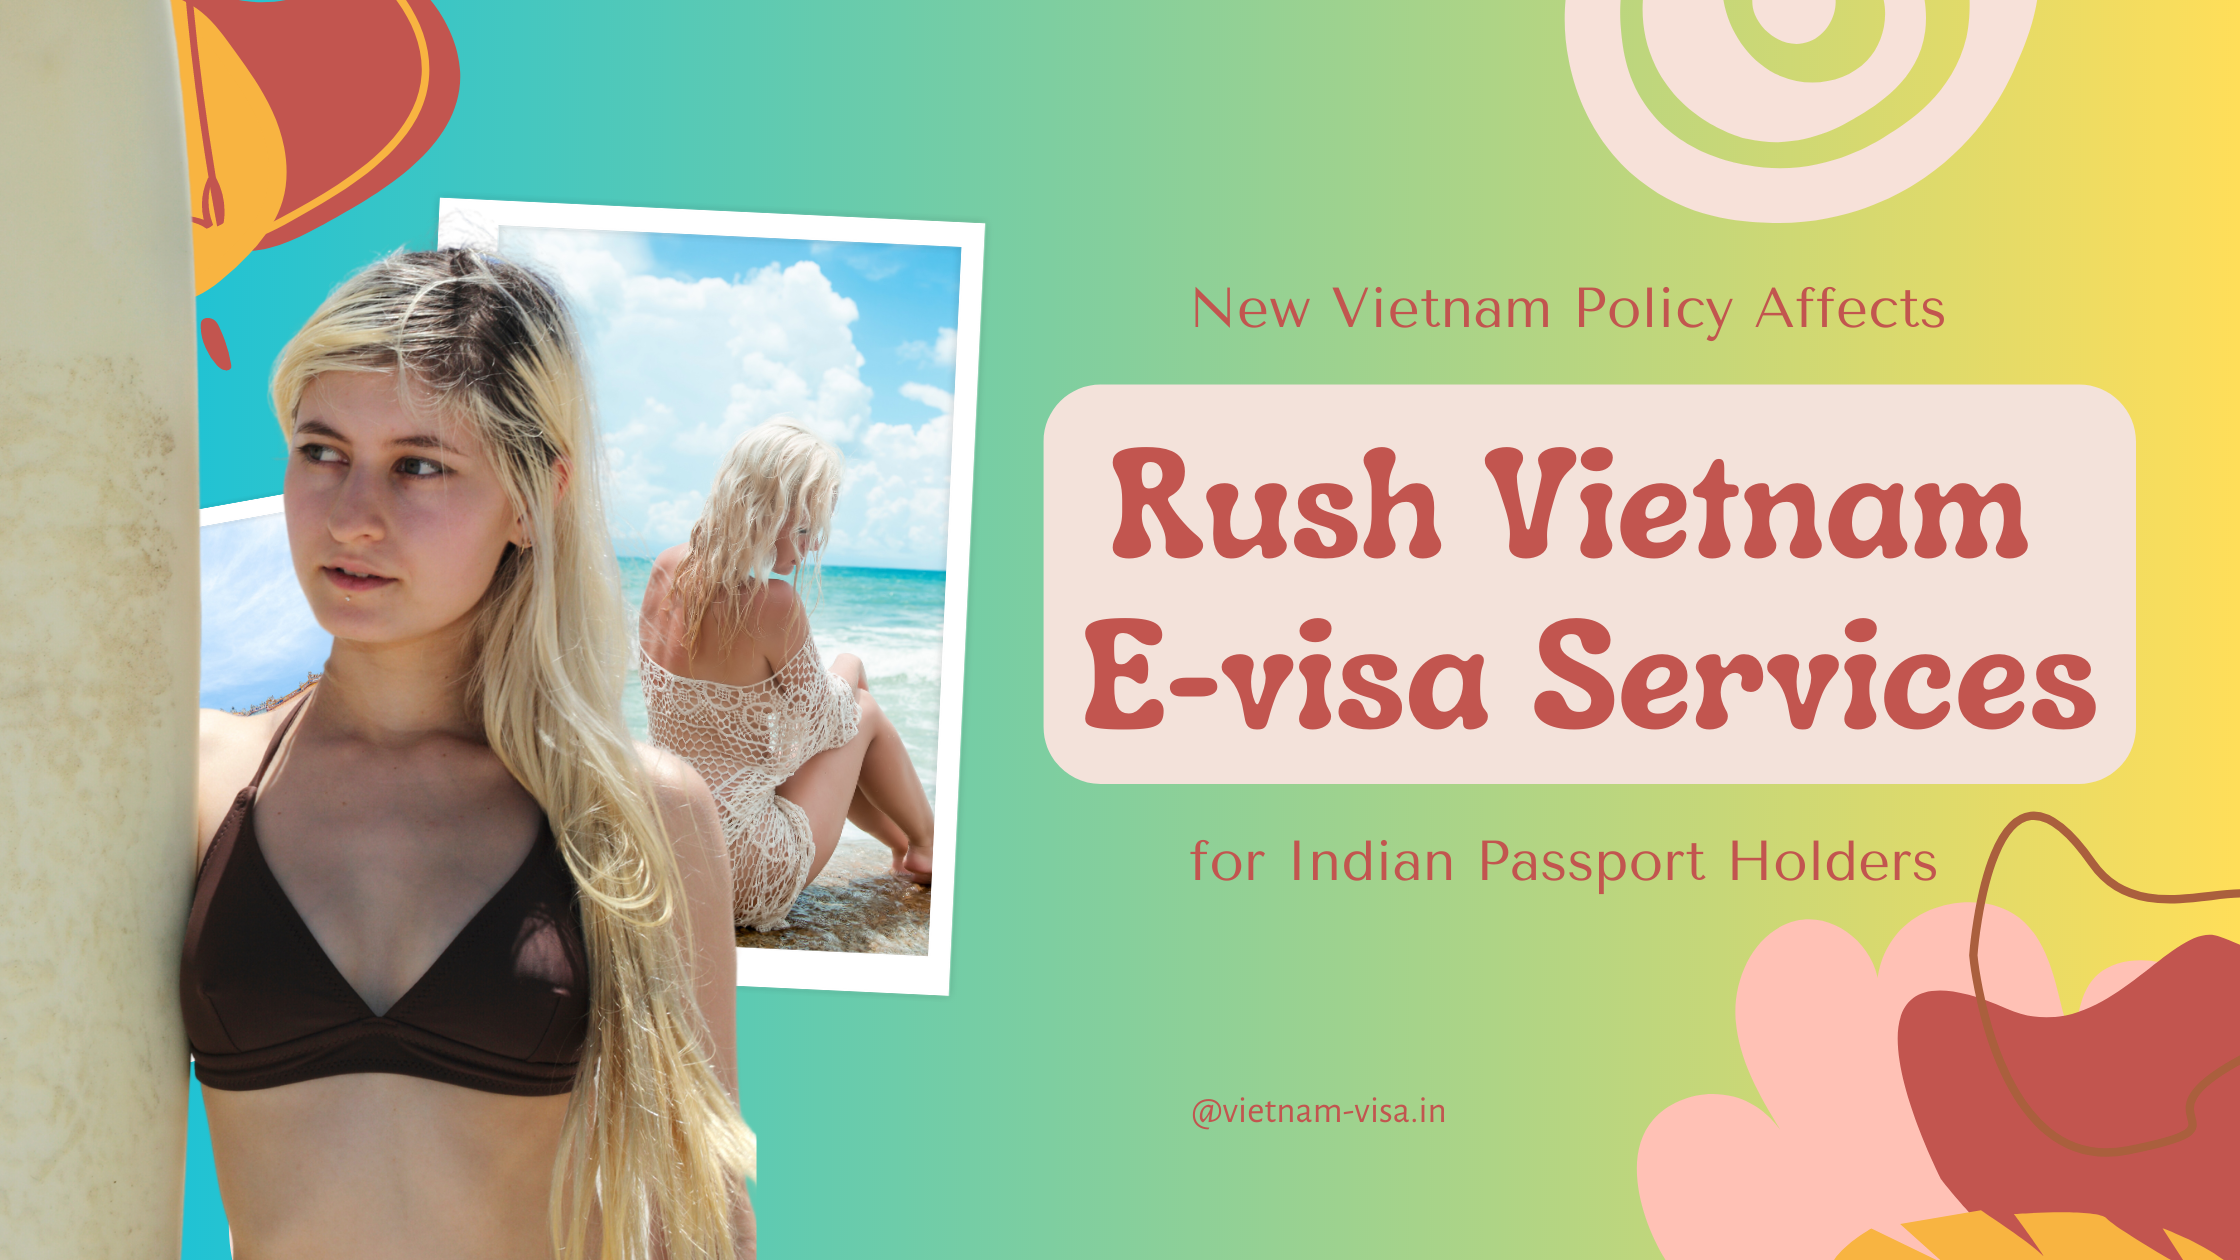 How-the-New-Vietnam-E-Visa-Policy-Affects-the-Rush-Vietnam-E-visa-Services-for-Indian-passport-holders-2023-2024